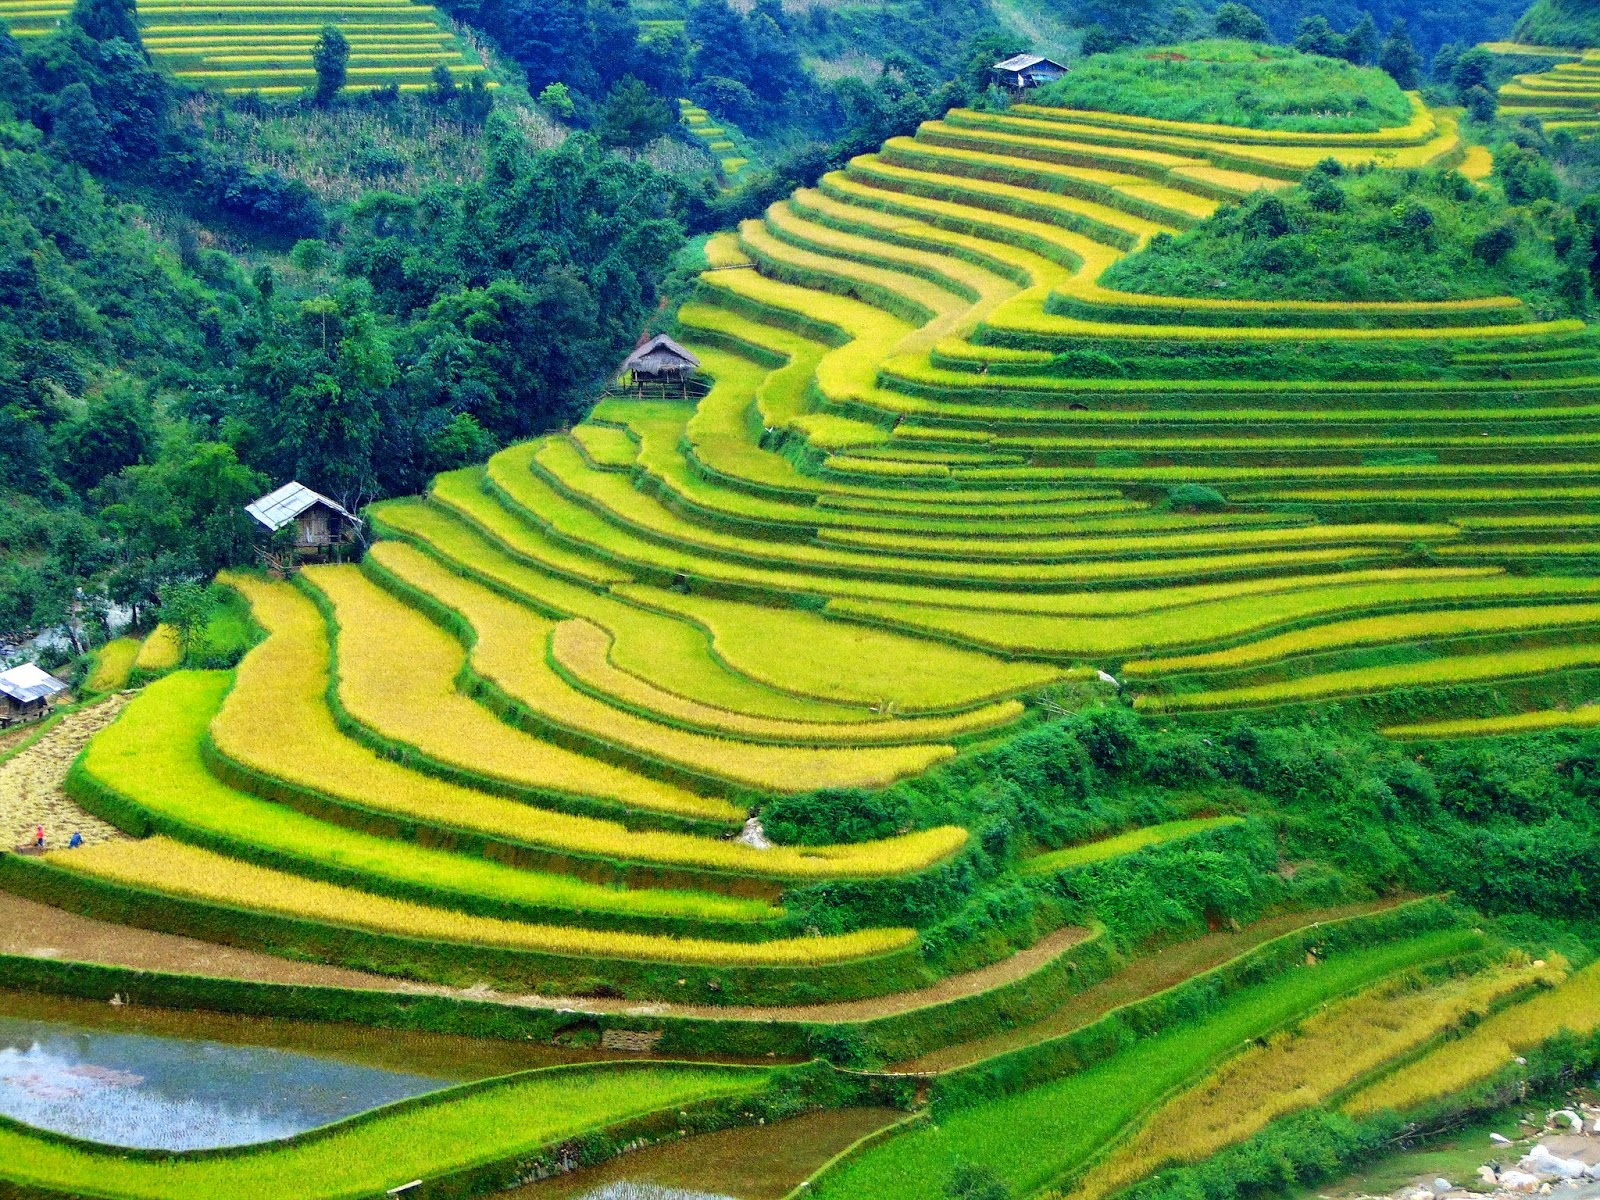 Visit other beautiful terraced fields